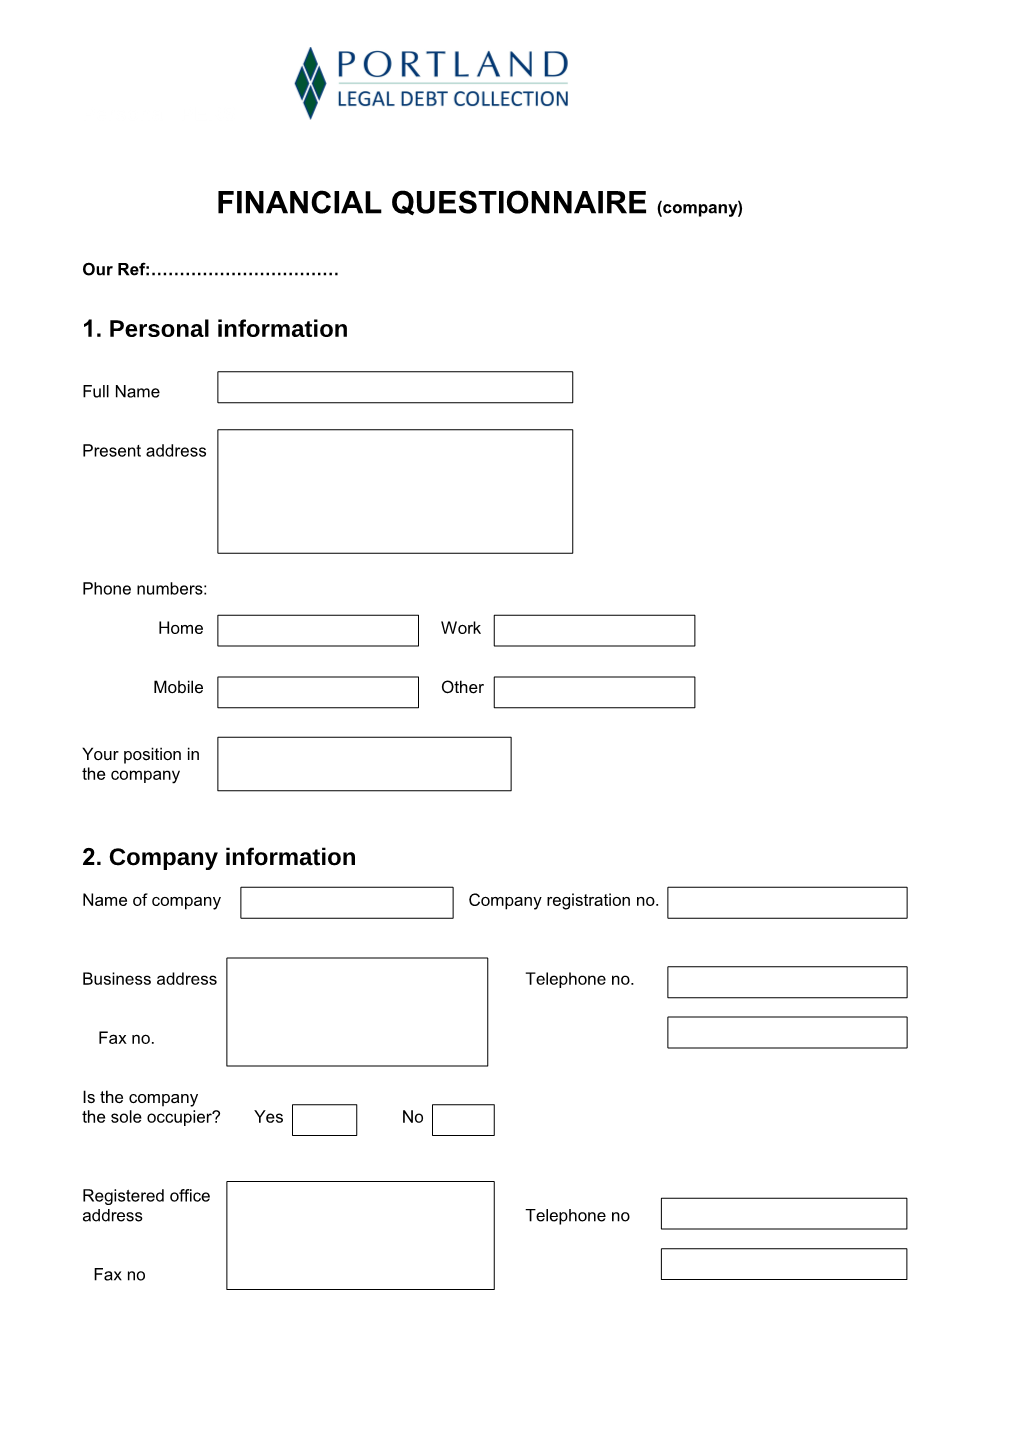 FINANCIAL QUESTIONNAIRE(Company)